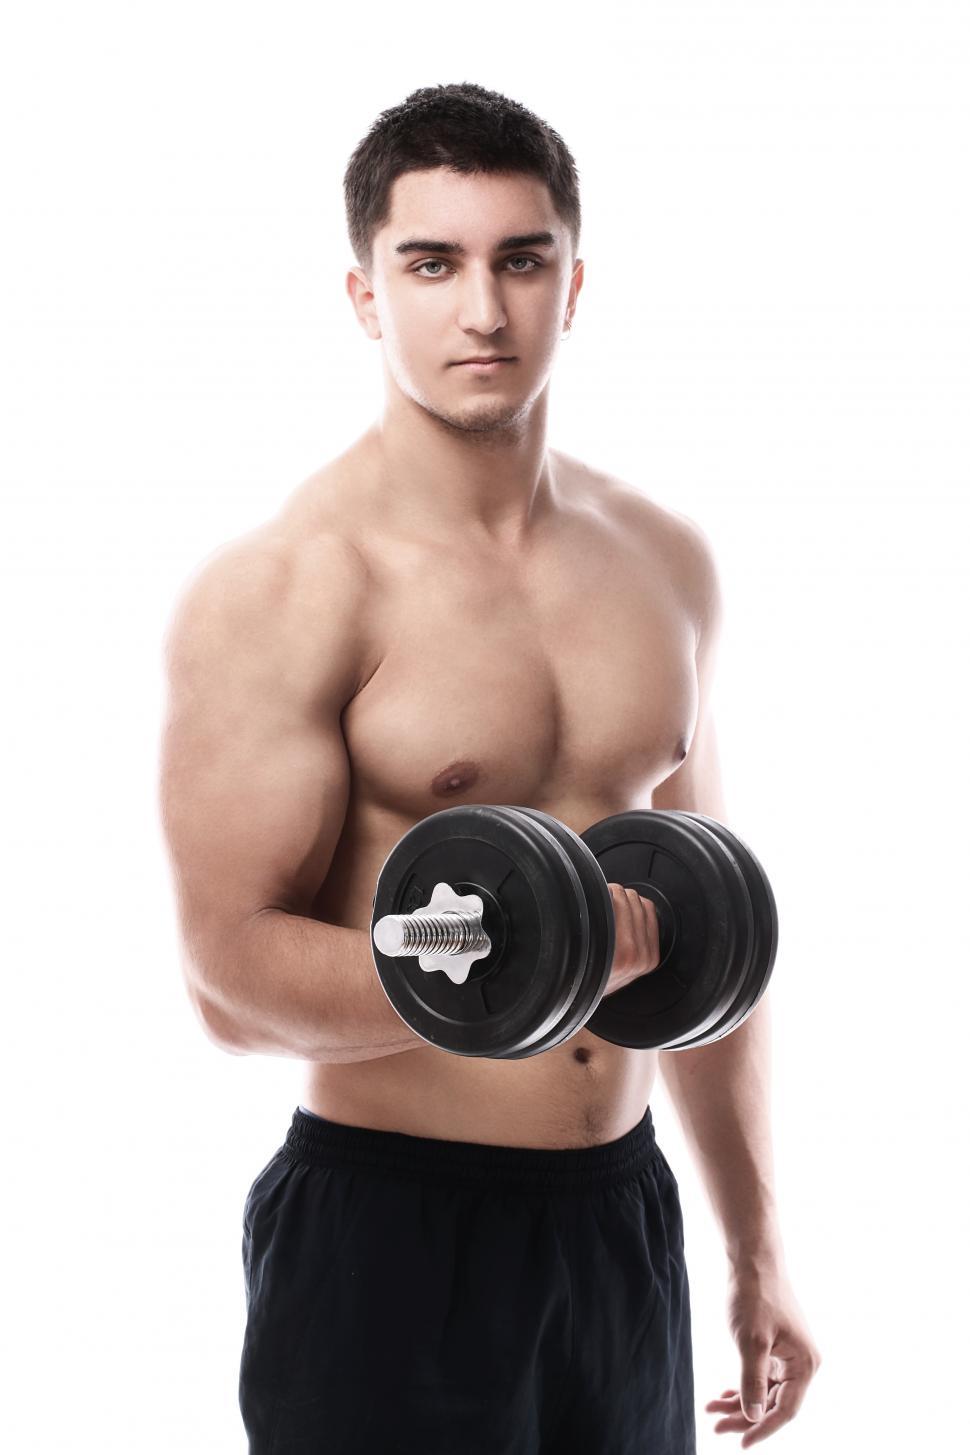 Free Image of Muscular guy working out with dumbbell 